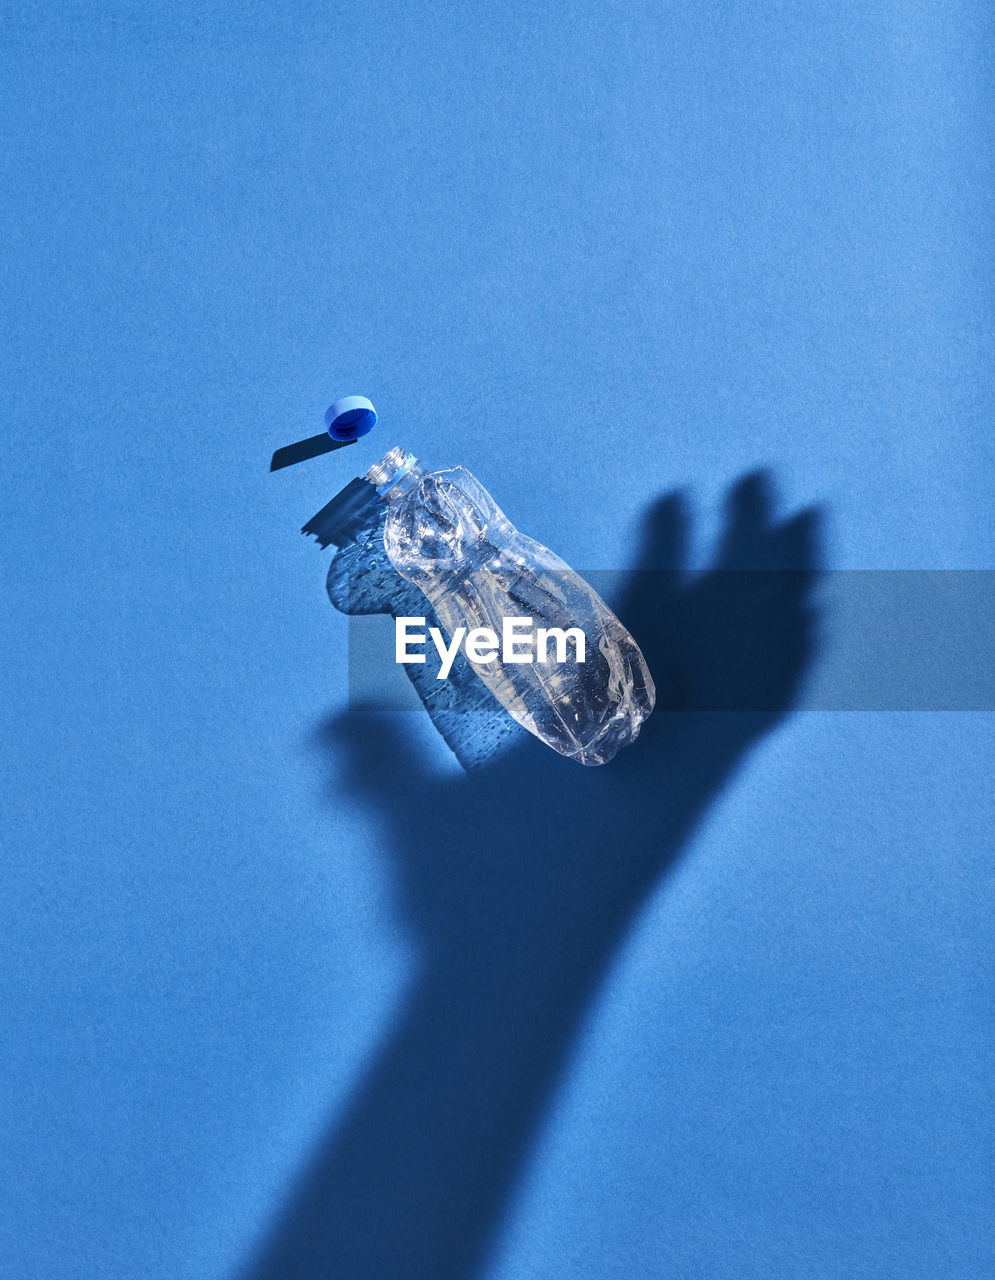 Shadow of a hand and plastic bottle, blue background